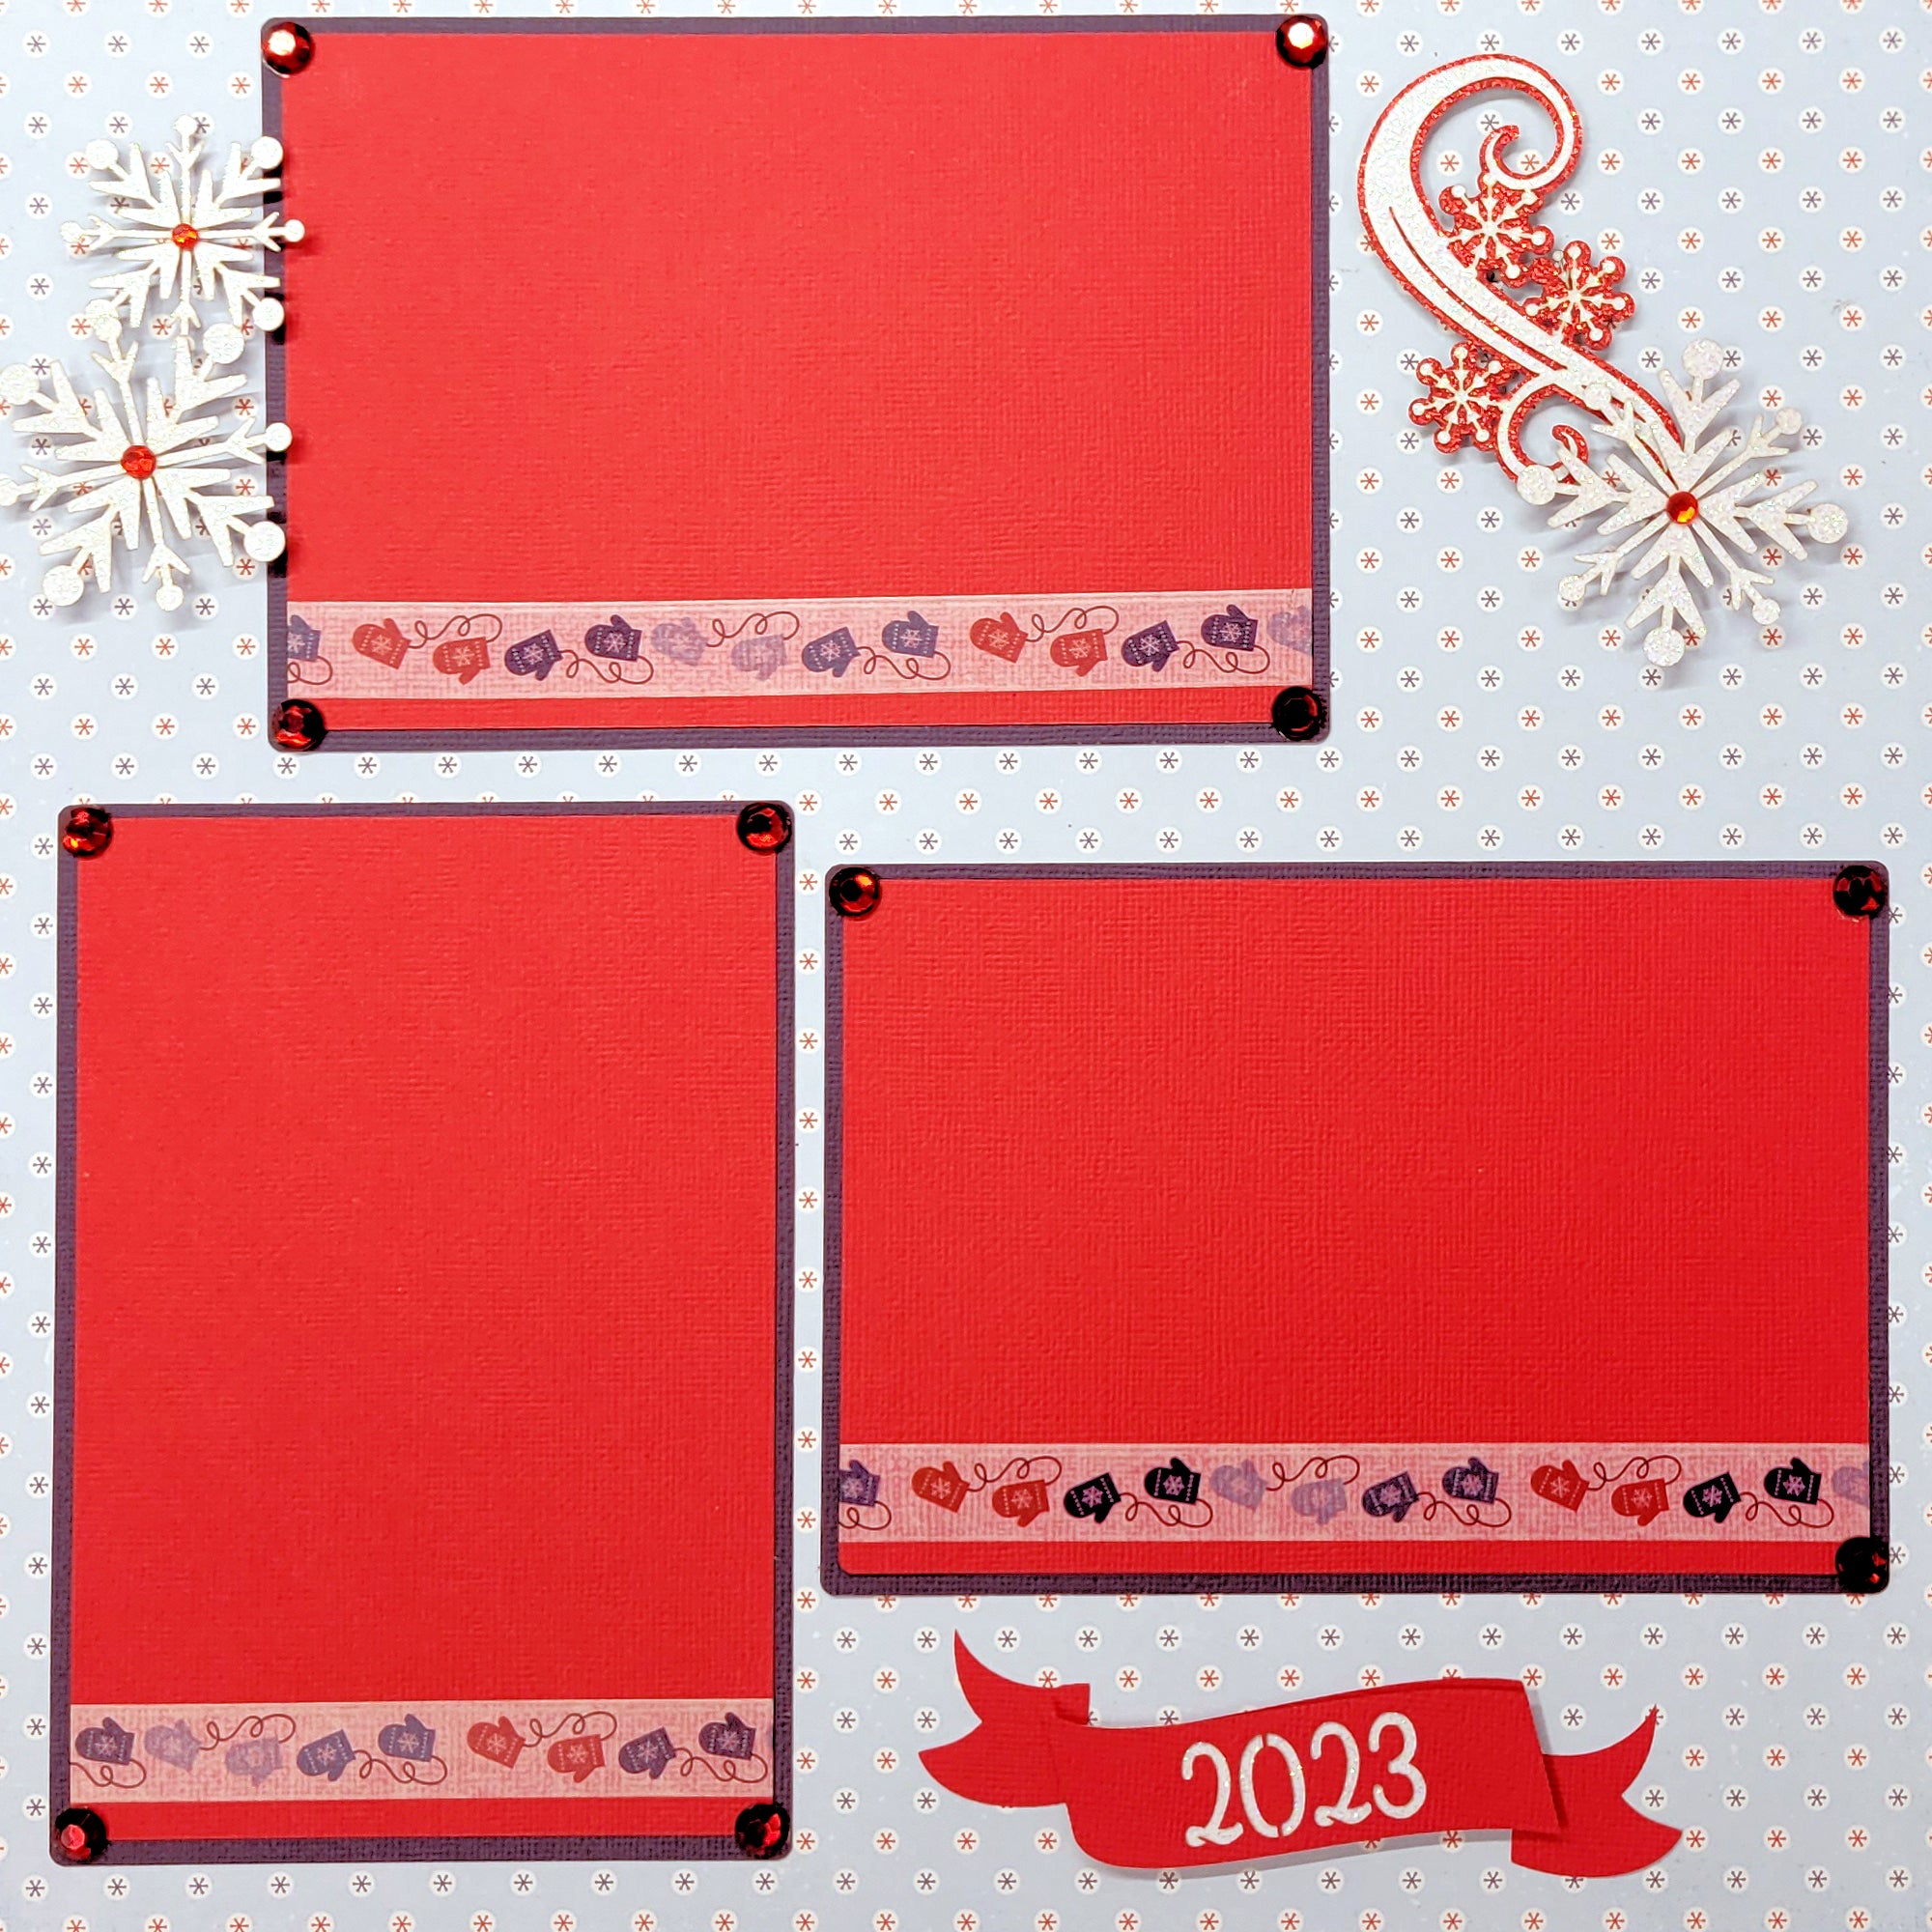 Winter Wonderland (2) - 12 x 12 Pages, Fully-Assembled & Hand-Crafted 3D Scrapbook Premade by SSC Designs